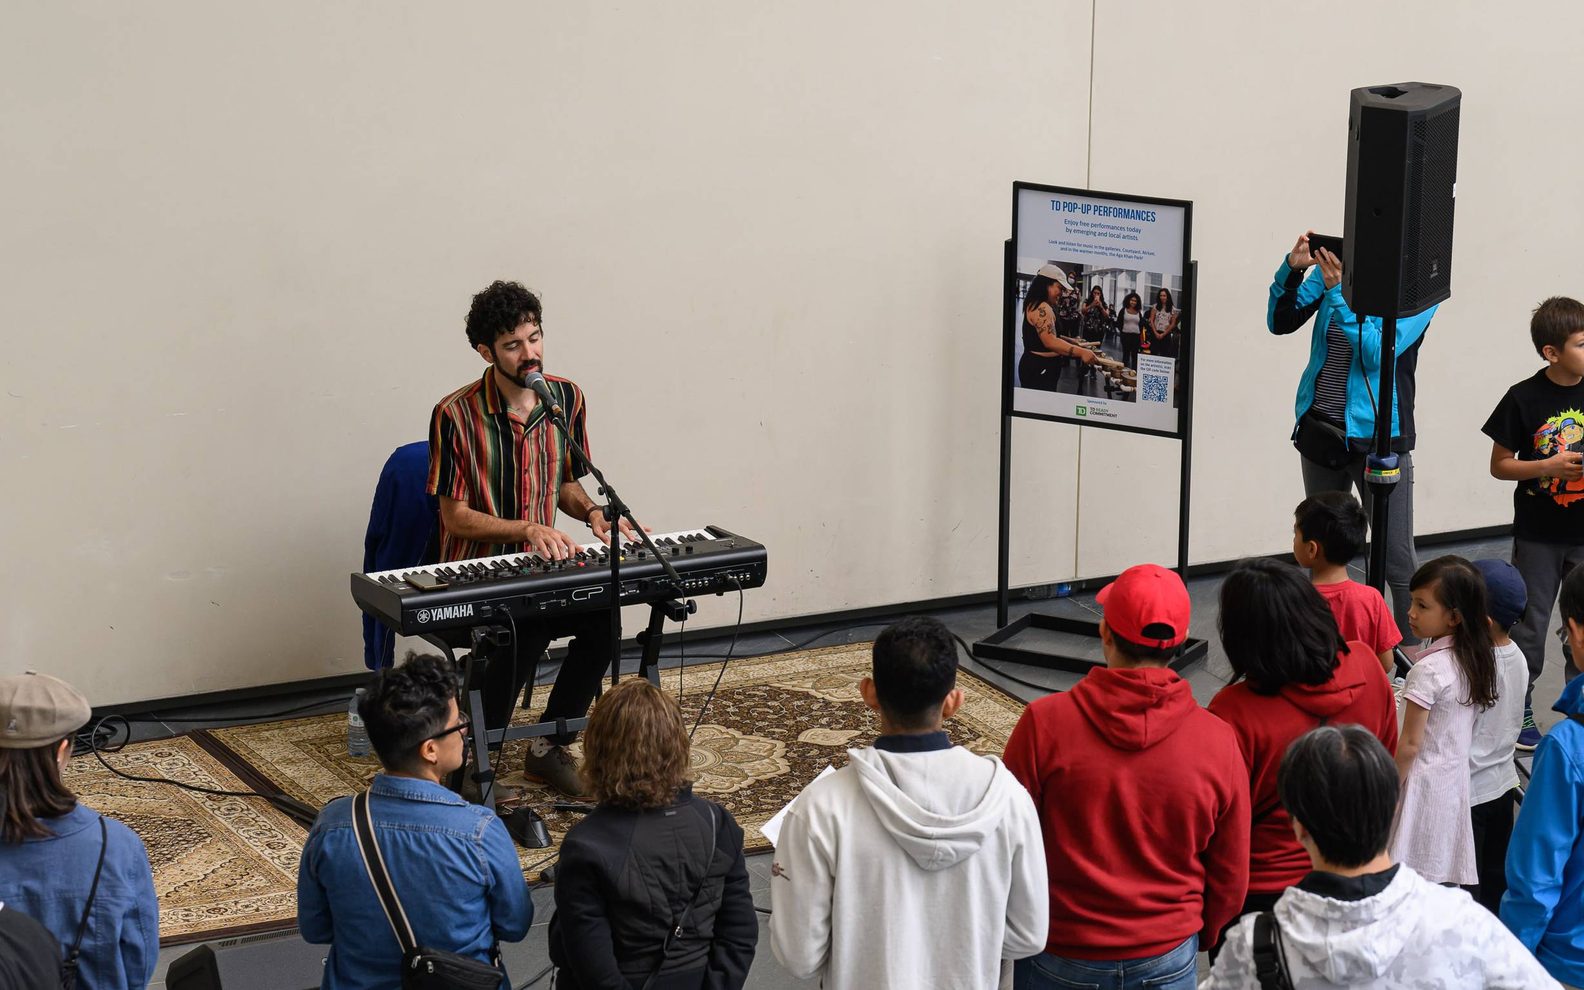 A TD pop up performer playing a piano and singing with an audience gathered in front of him inside the Aga Khan Museum